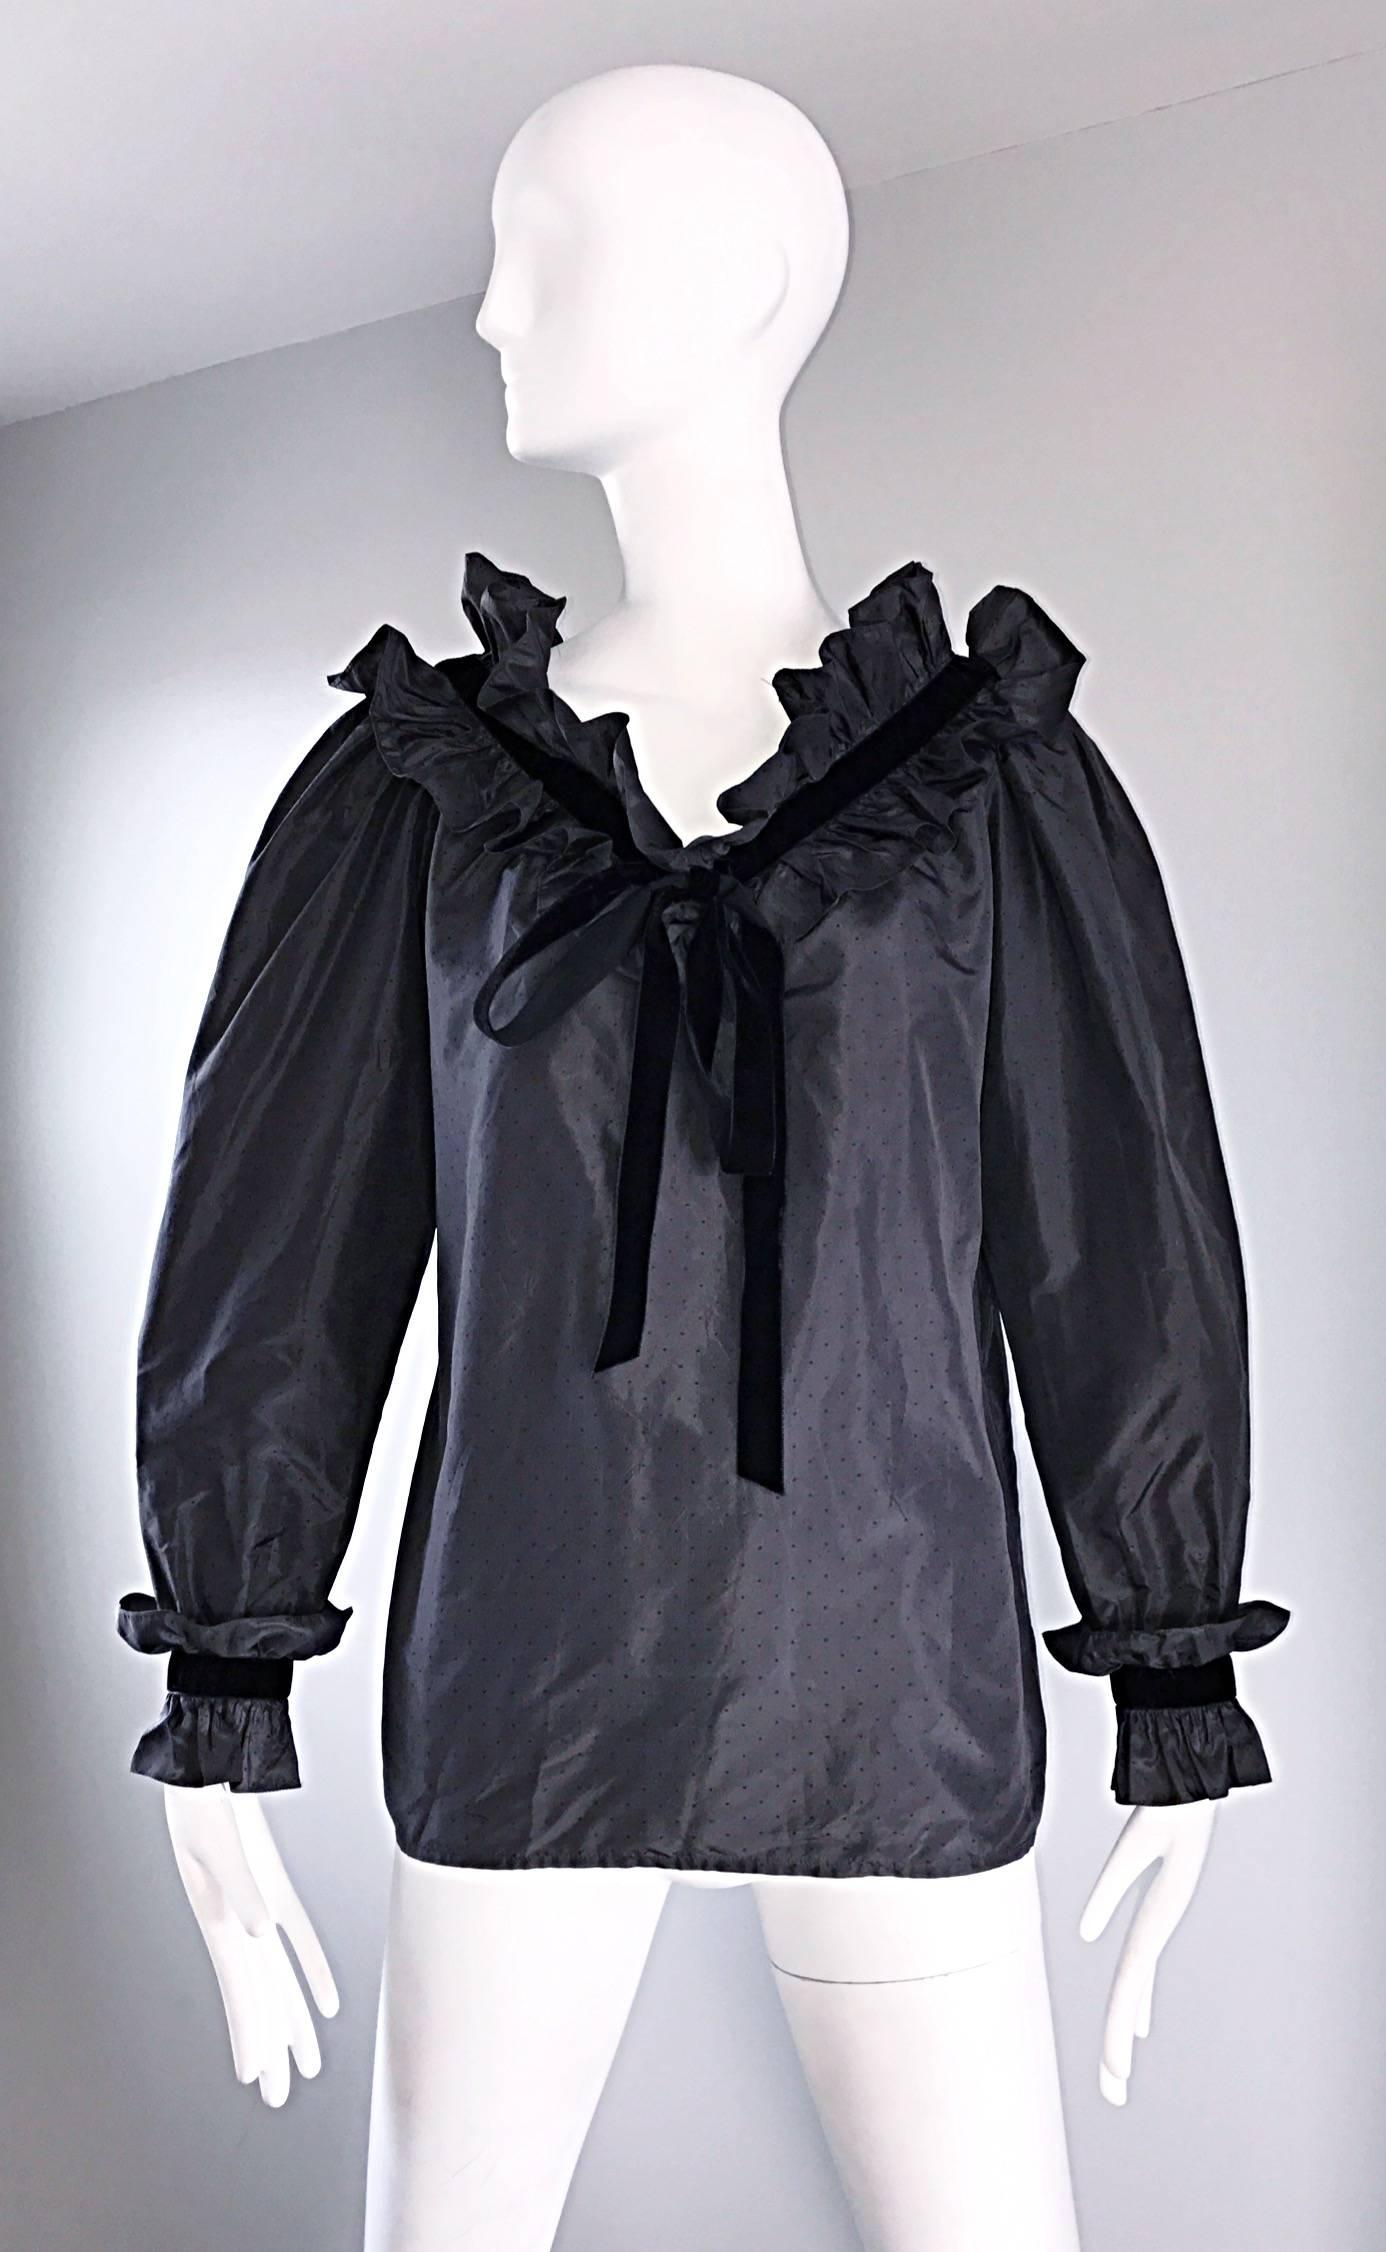 Sensational and rare vintage 1970s YVES SAINT LAURENT 'Rive Gauche' black silk taffeta poet bow and ruffle blouse from the famed 1976 Russian Collection! Features tiny allover black polka dots throughout. Couture quality, with most of the